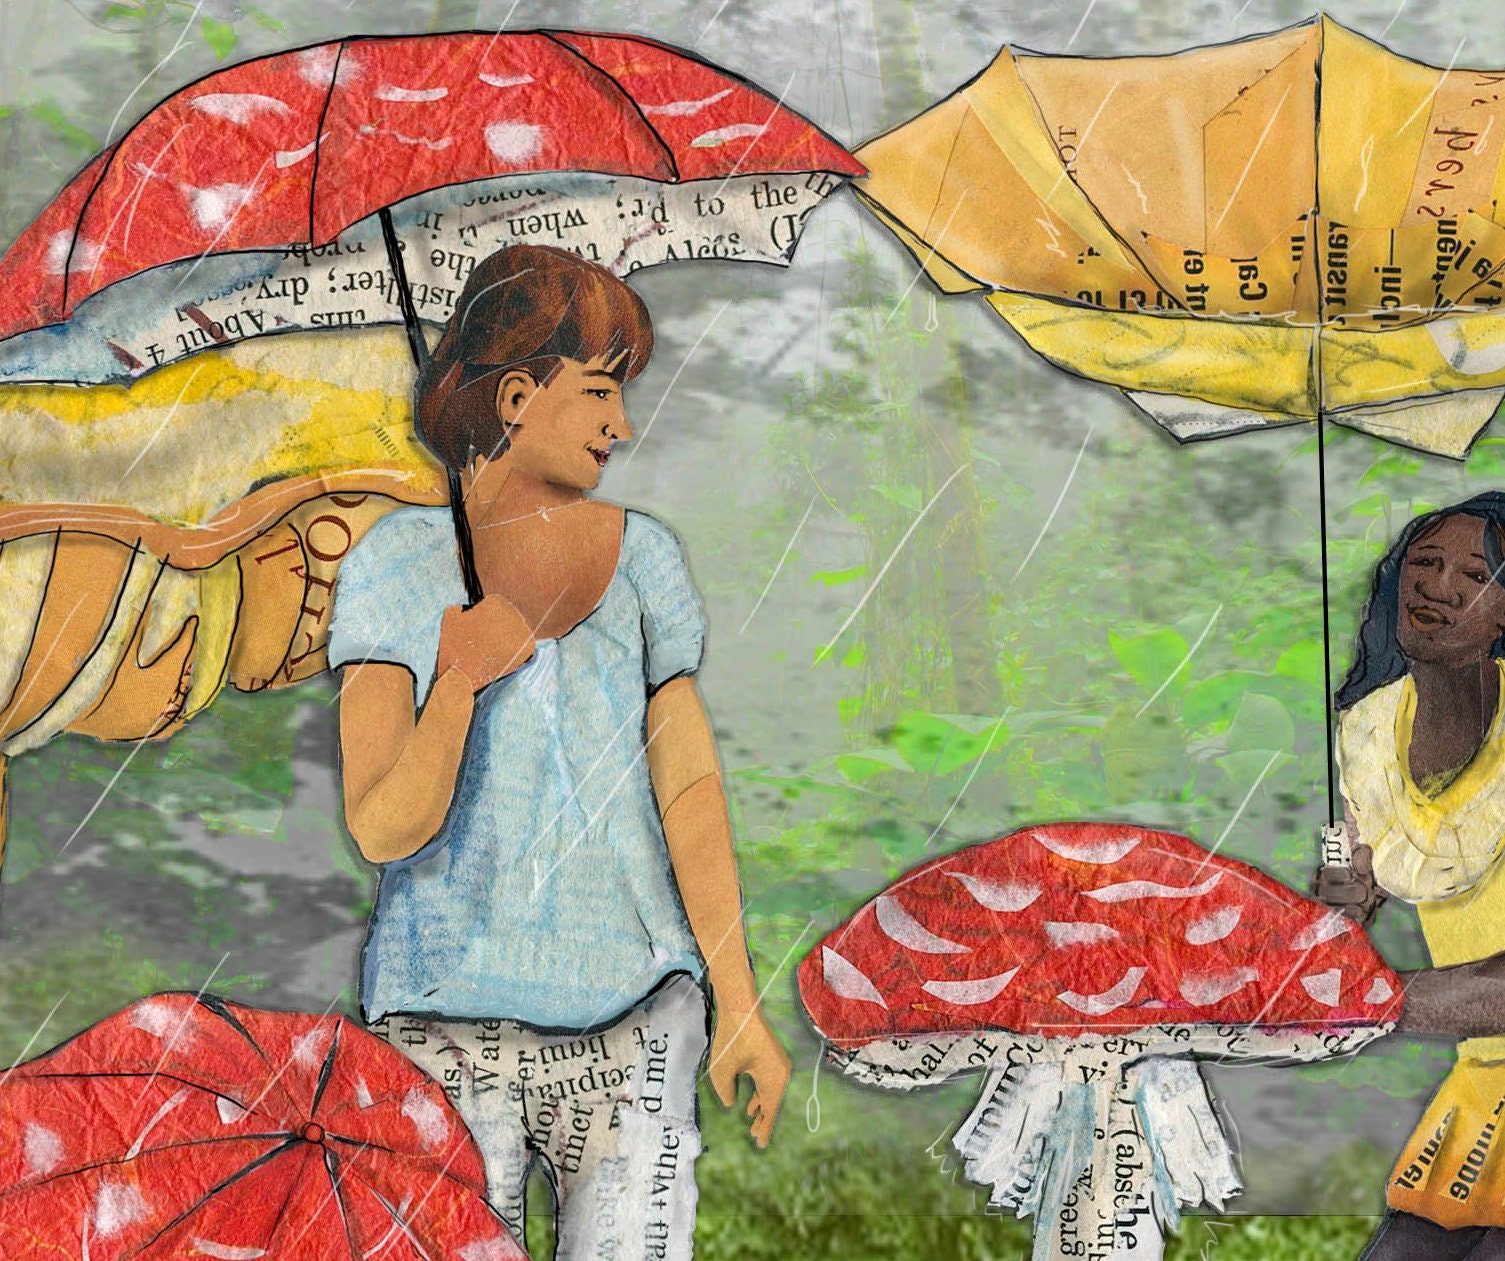 8x10 Art Print of a mixed media collage of people with umbrellas walking among mushrooms, magic, wild, connection to nature